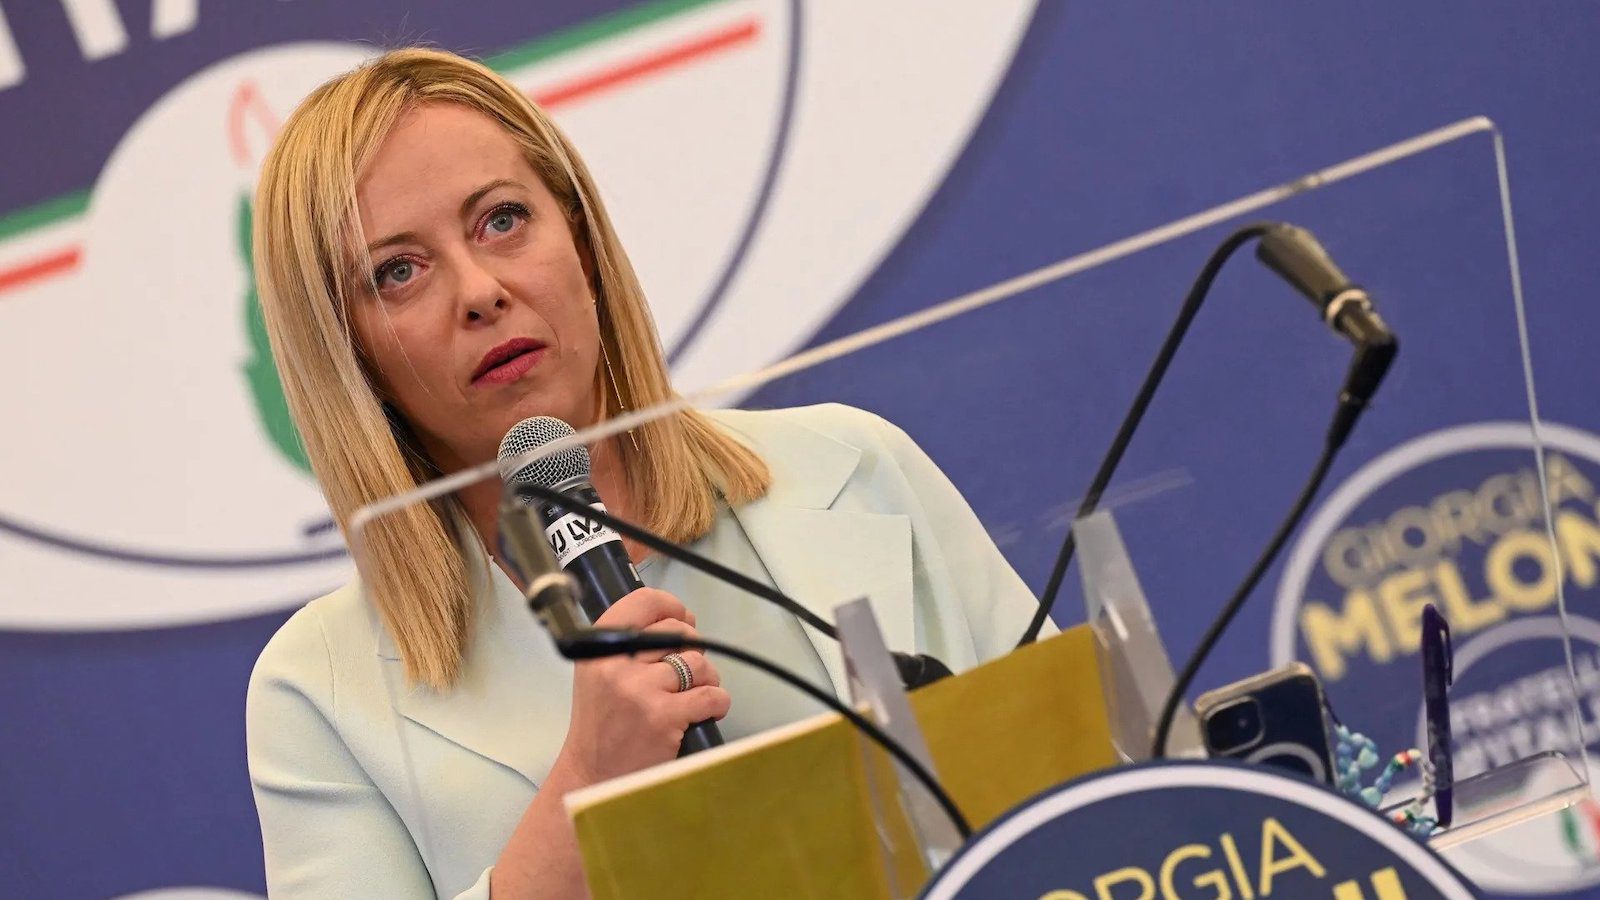 Giorgia Meloni, Brothers of Italy Party, Wins the Italian Election